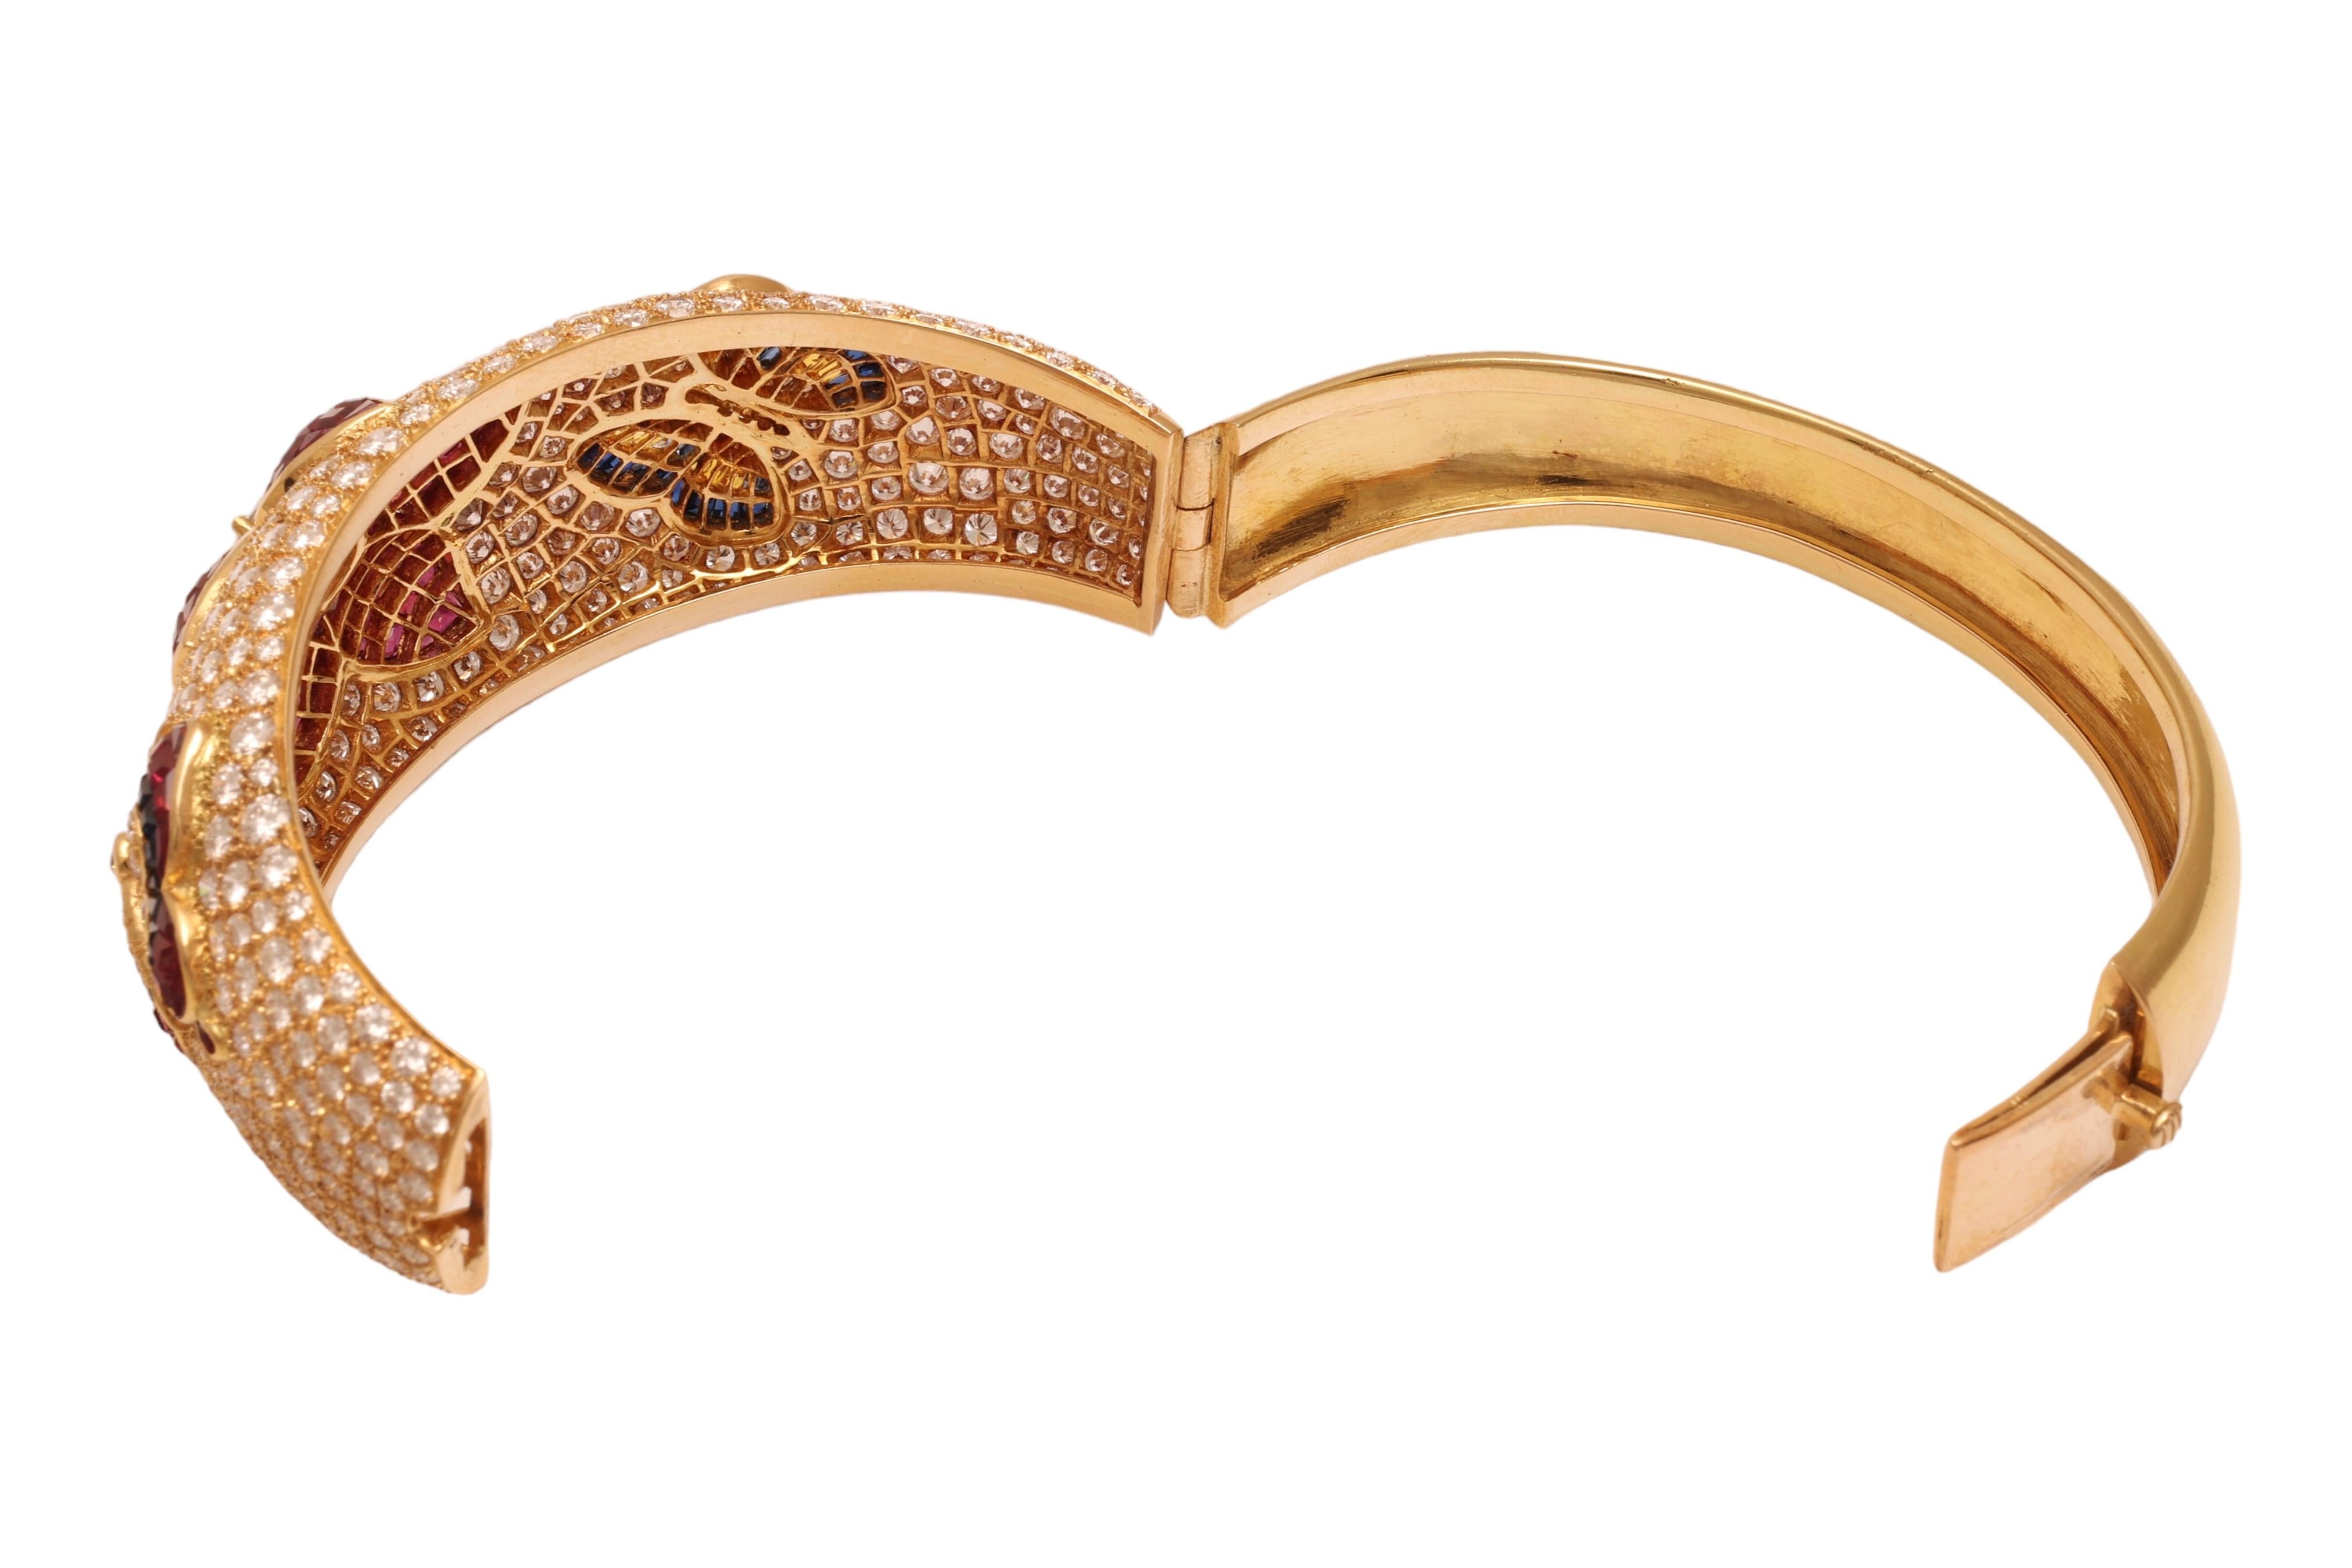 18 kt. Yellow Gold Wide Bangle Bracelet With Diamonds, Rubies, Sapphires For Sale 6